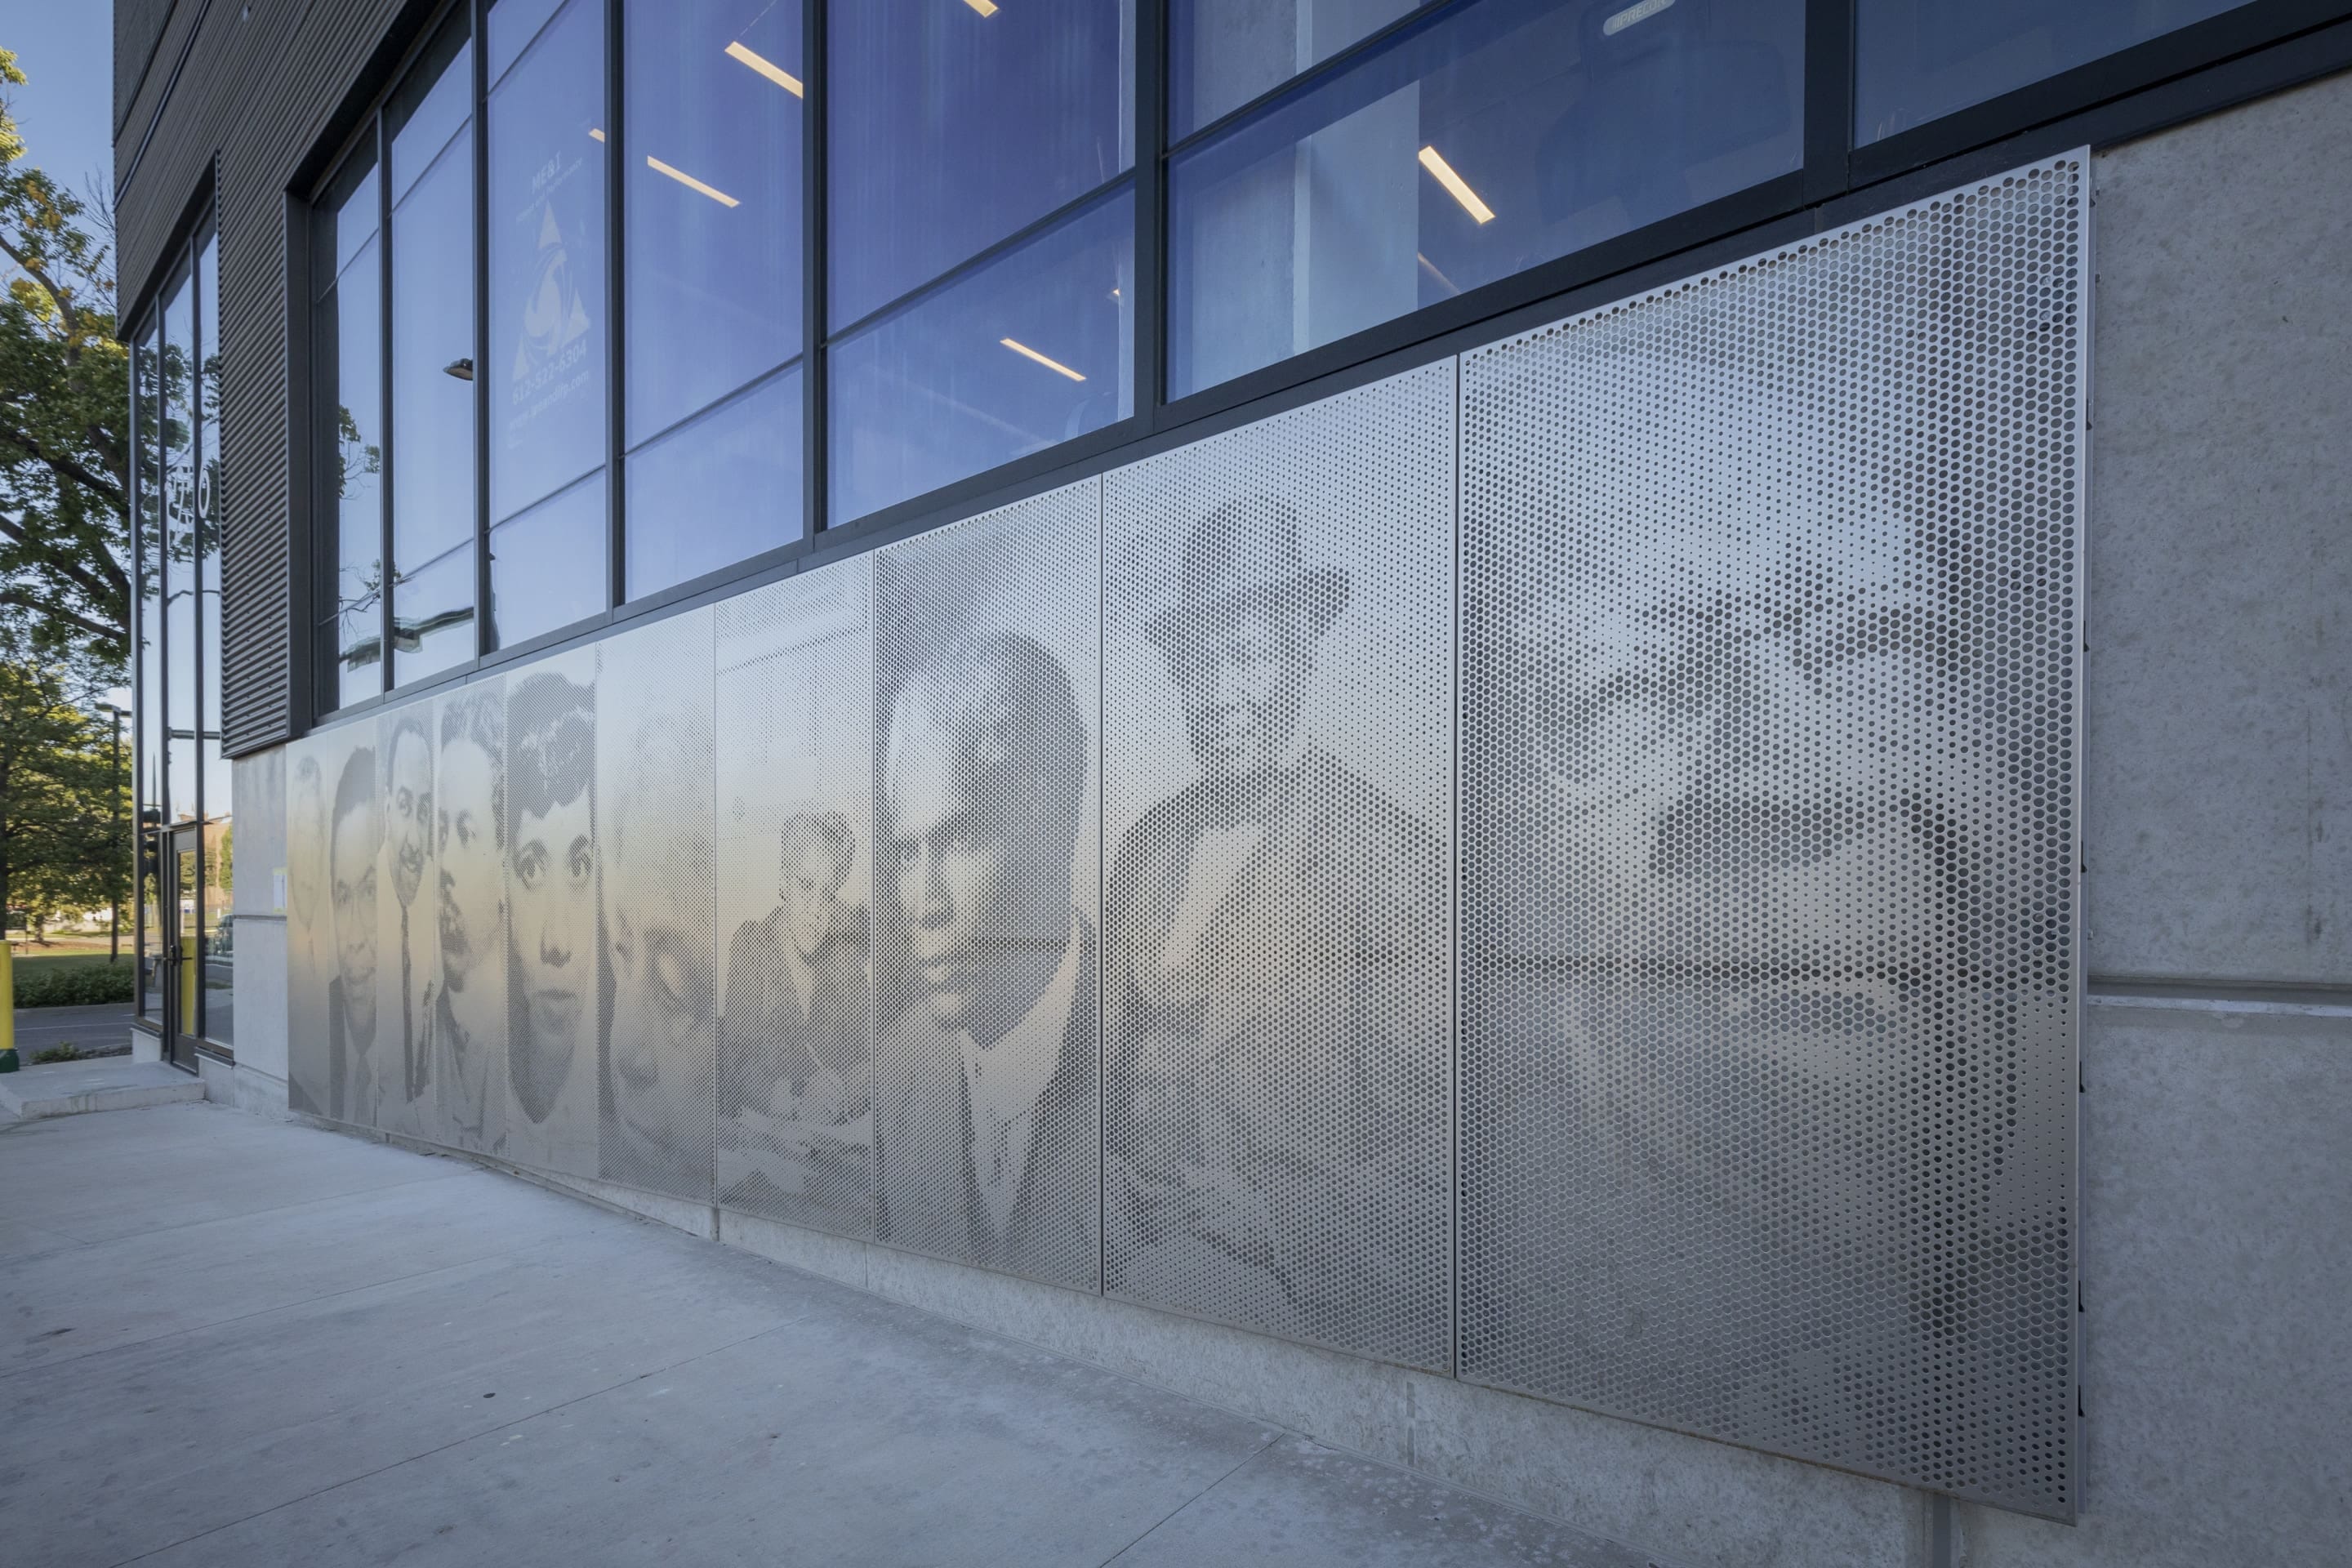 ImageWall mural depicting historic local civil rights figures on 1256 N Plymouth Ave in Minneapolis.